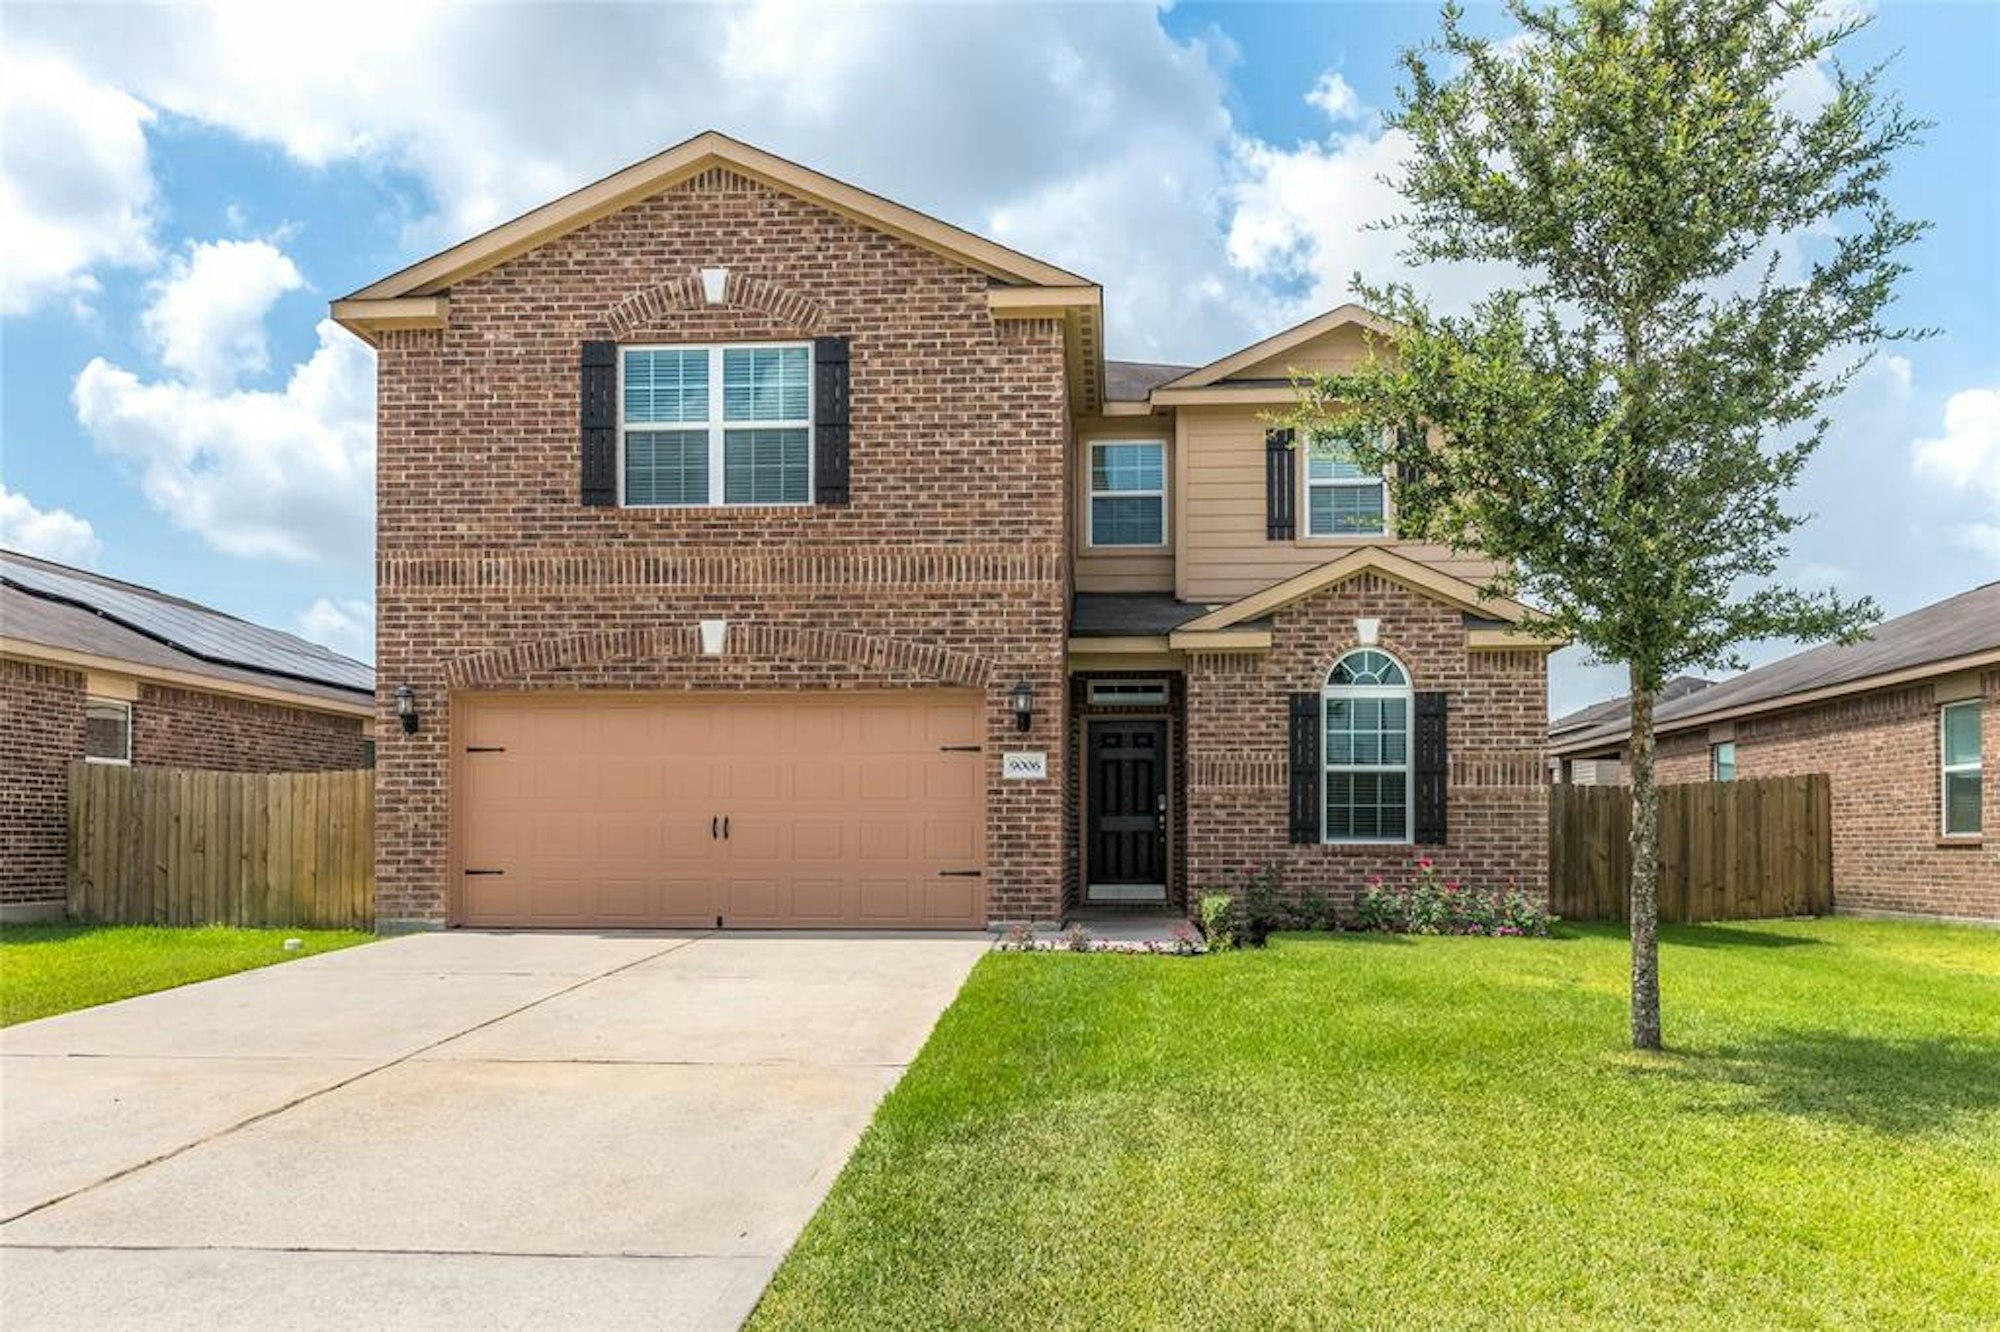 Photo 1 of 22 - 9006 Stagewood Dr, Humble, TX 77338